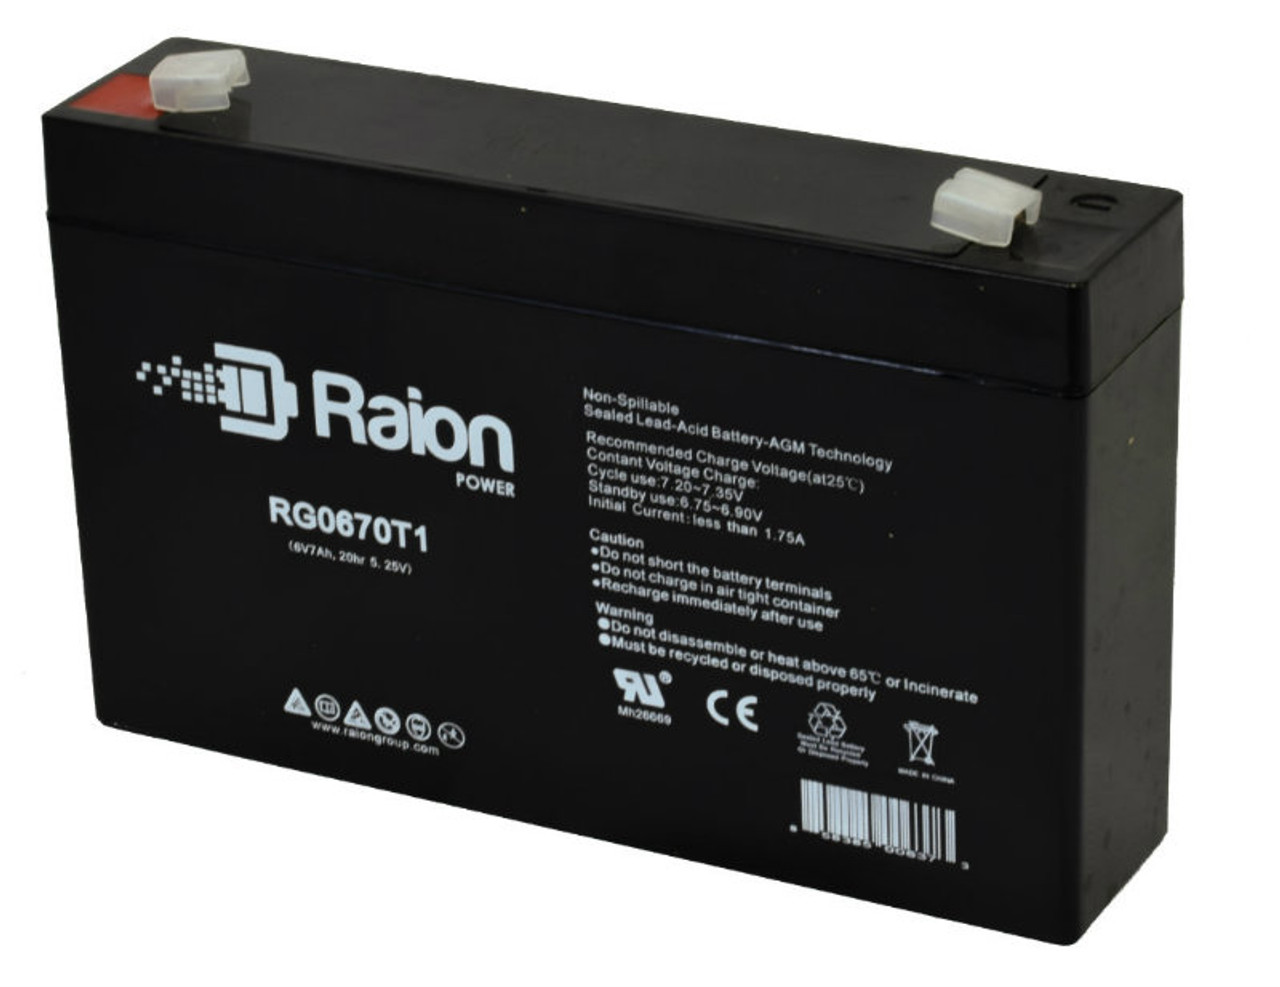 Raion Power RG0670T1 6V 7Ah Replacement Emergency Light Battery for Sure-Lites 3902